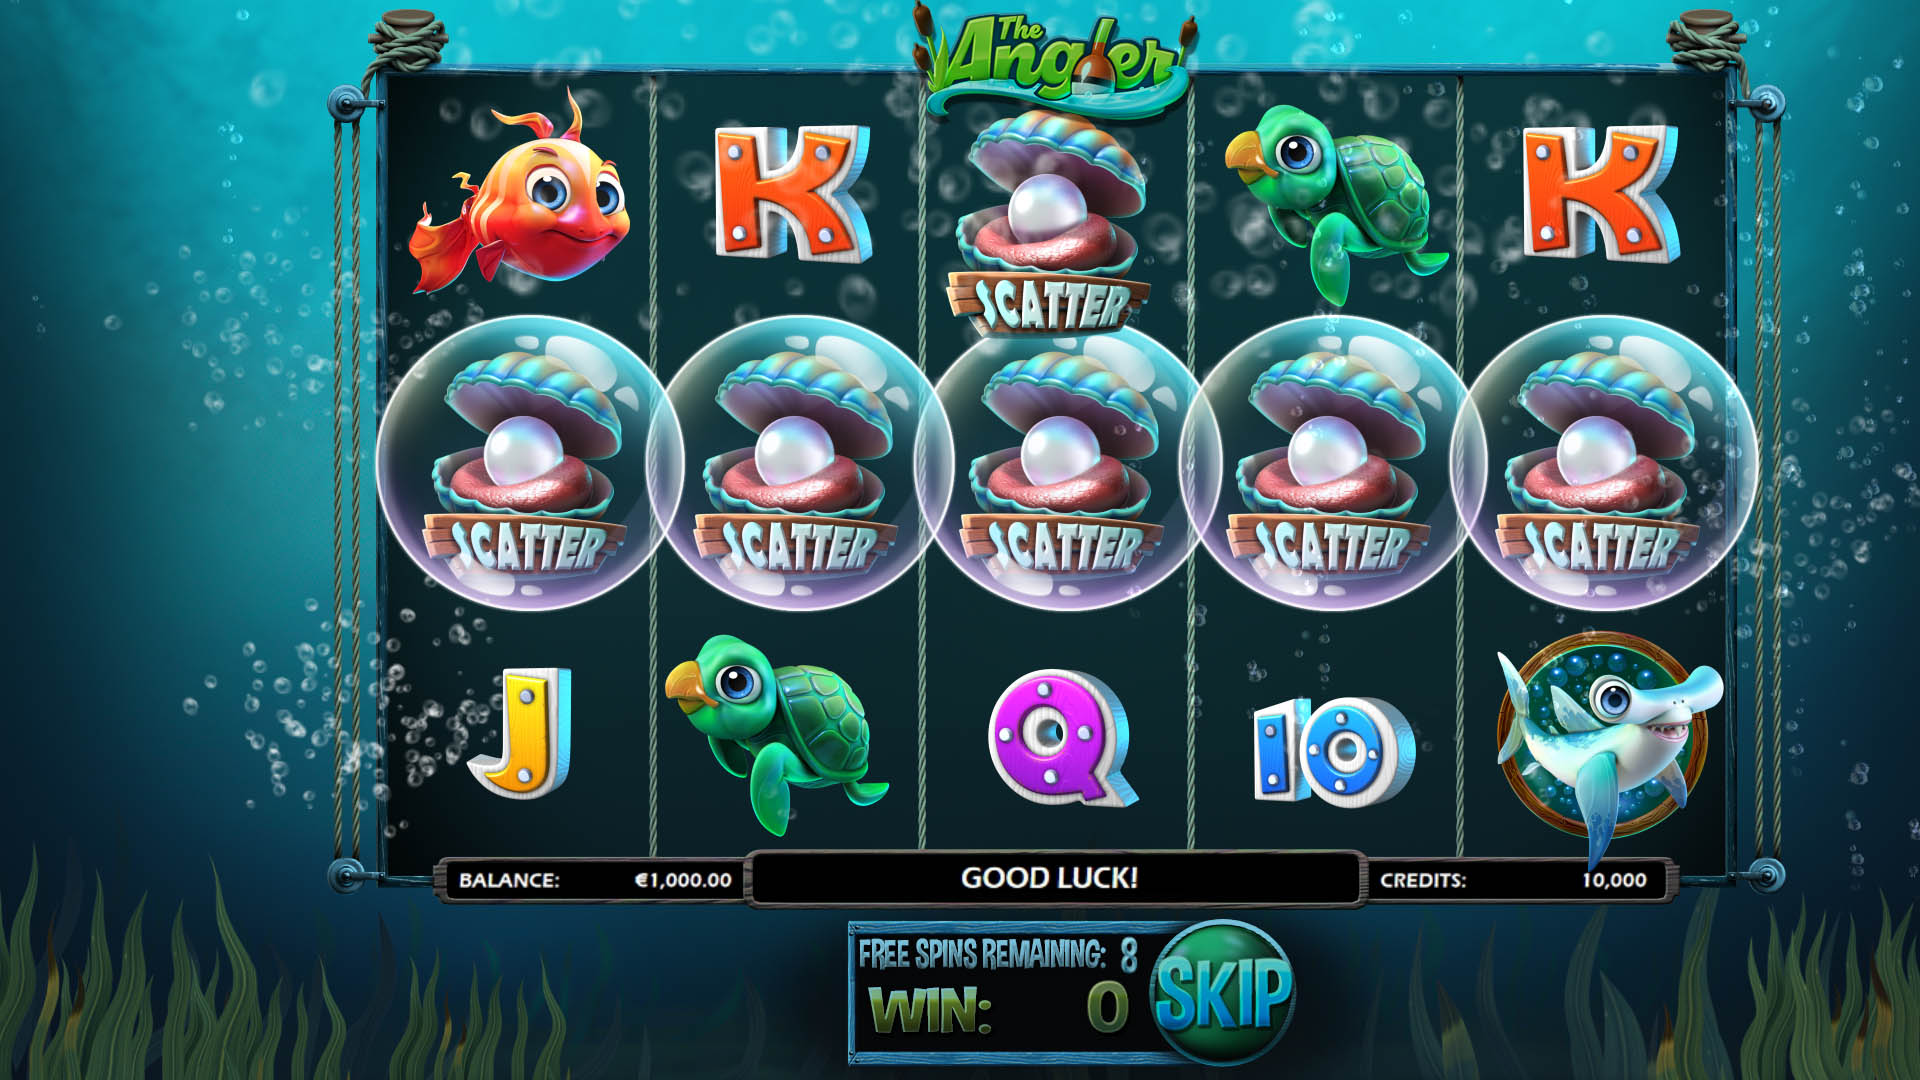 The Angler - Oyster Free Spins